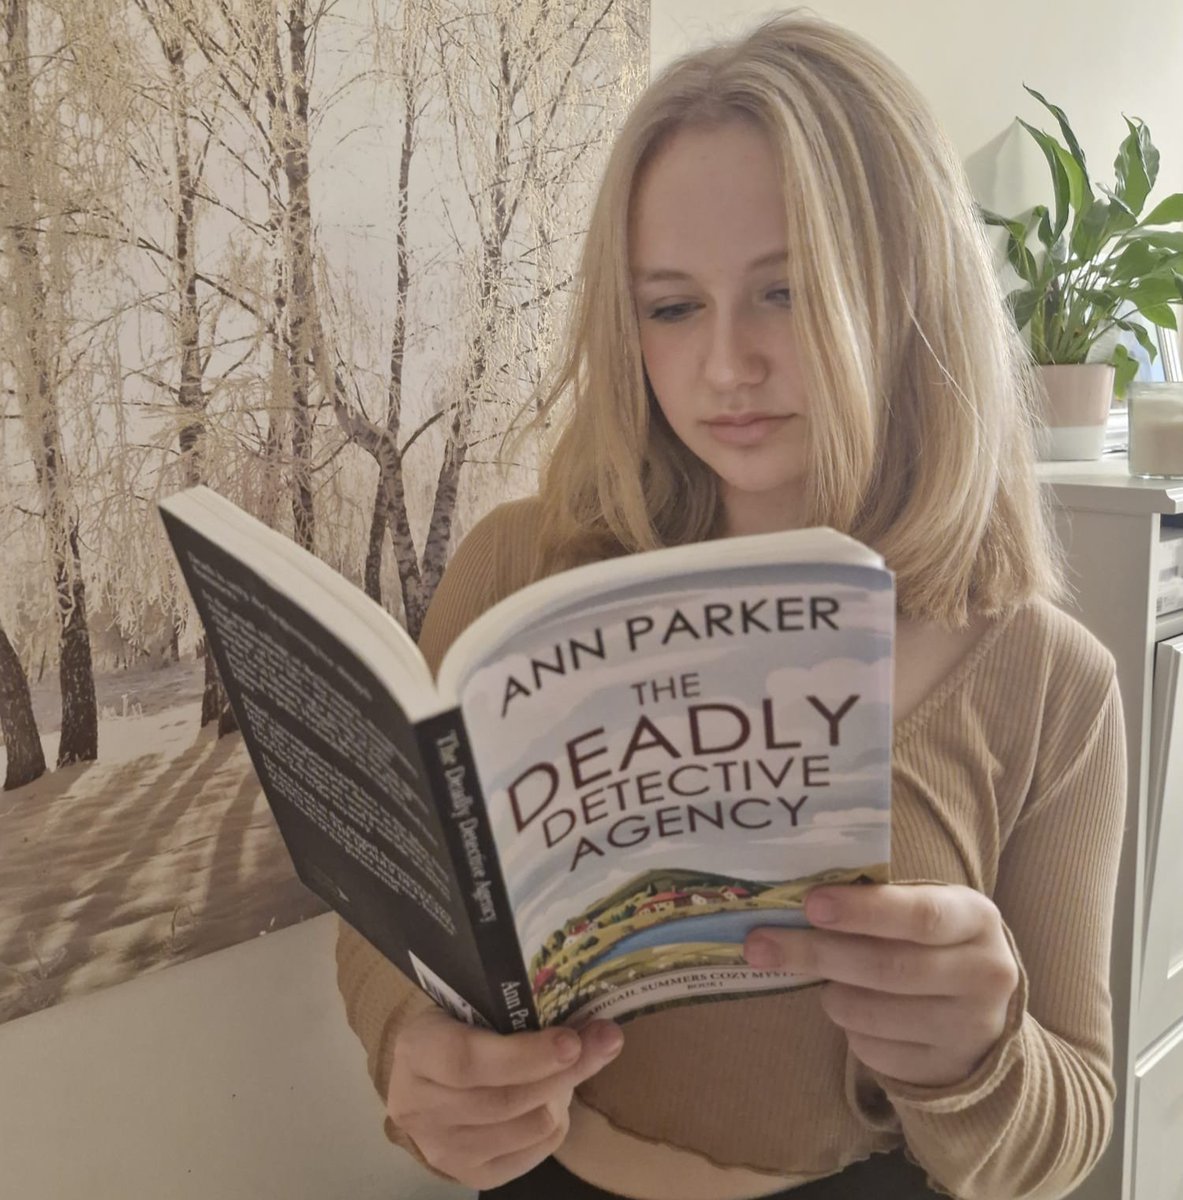 My granddaughter is loving the suspense, humour and the paranormal stories in my Abigail Summers Cozy Mysteries
#BookTwitter  #womensleuths #detectives #booksforteenagers